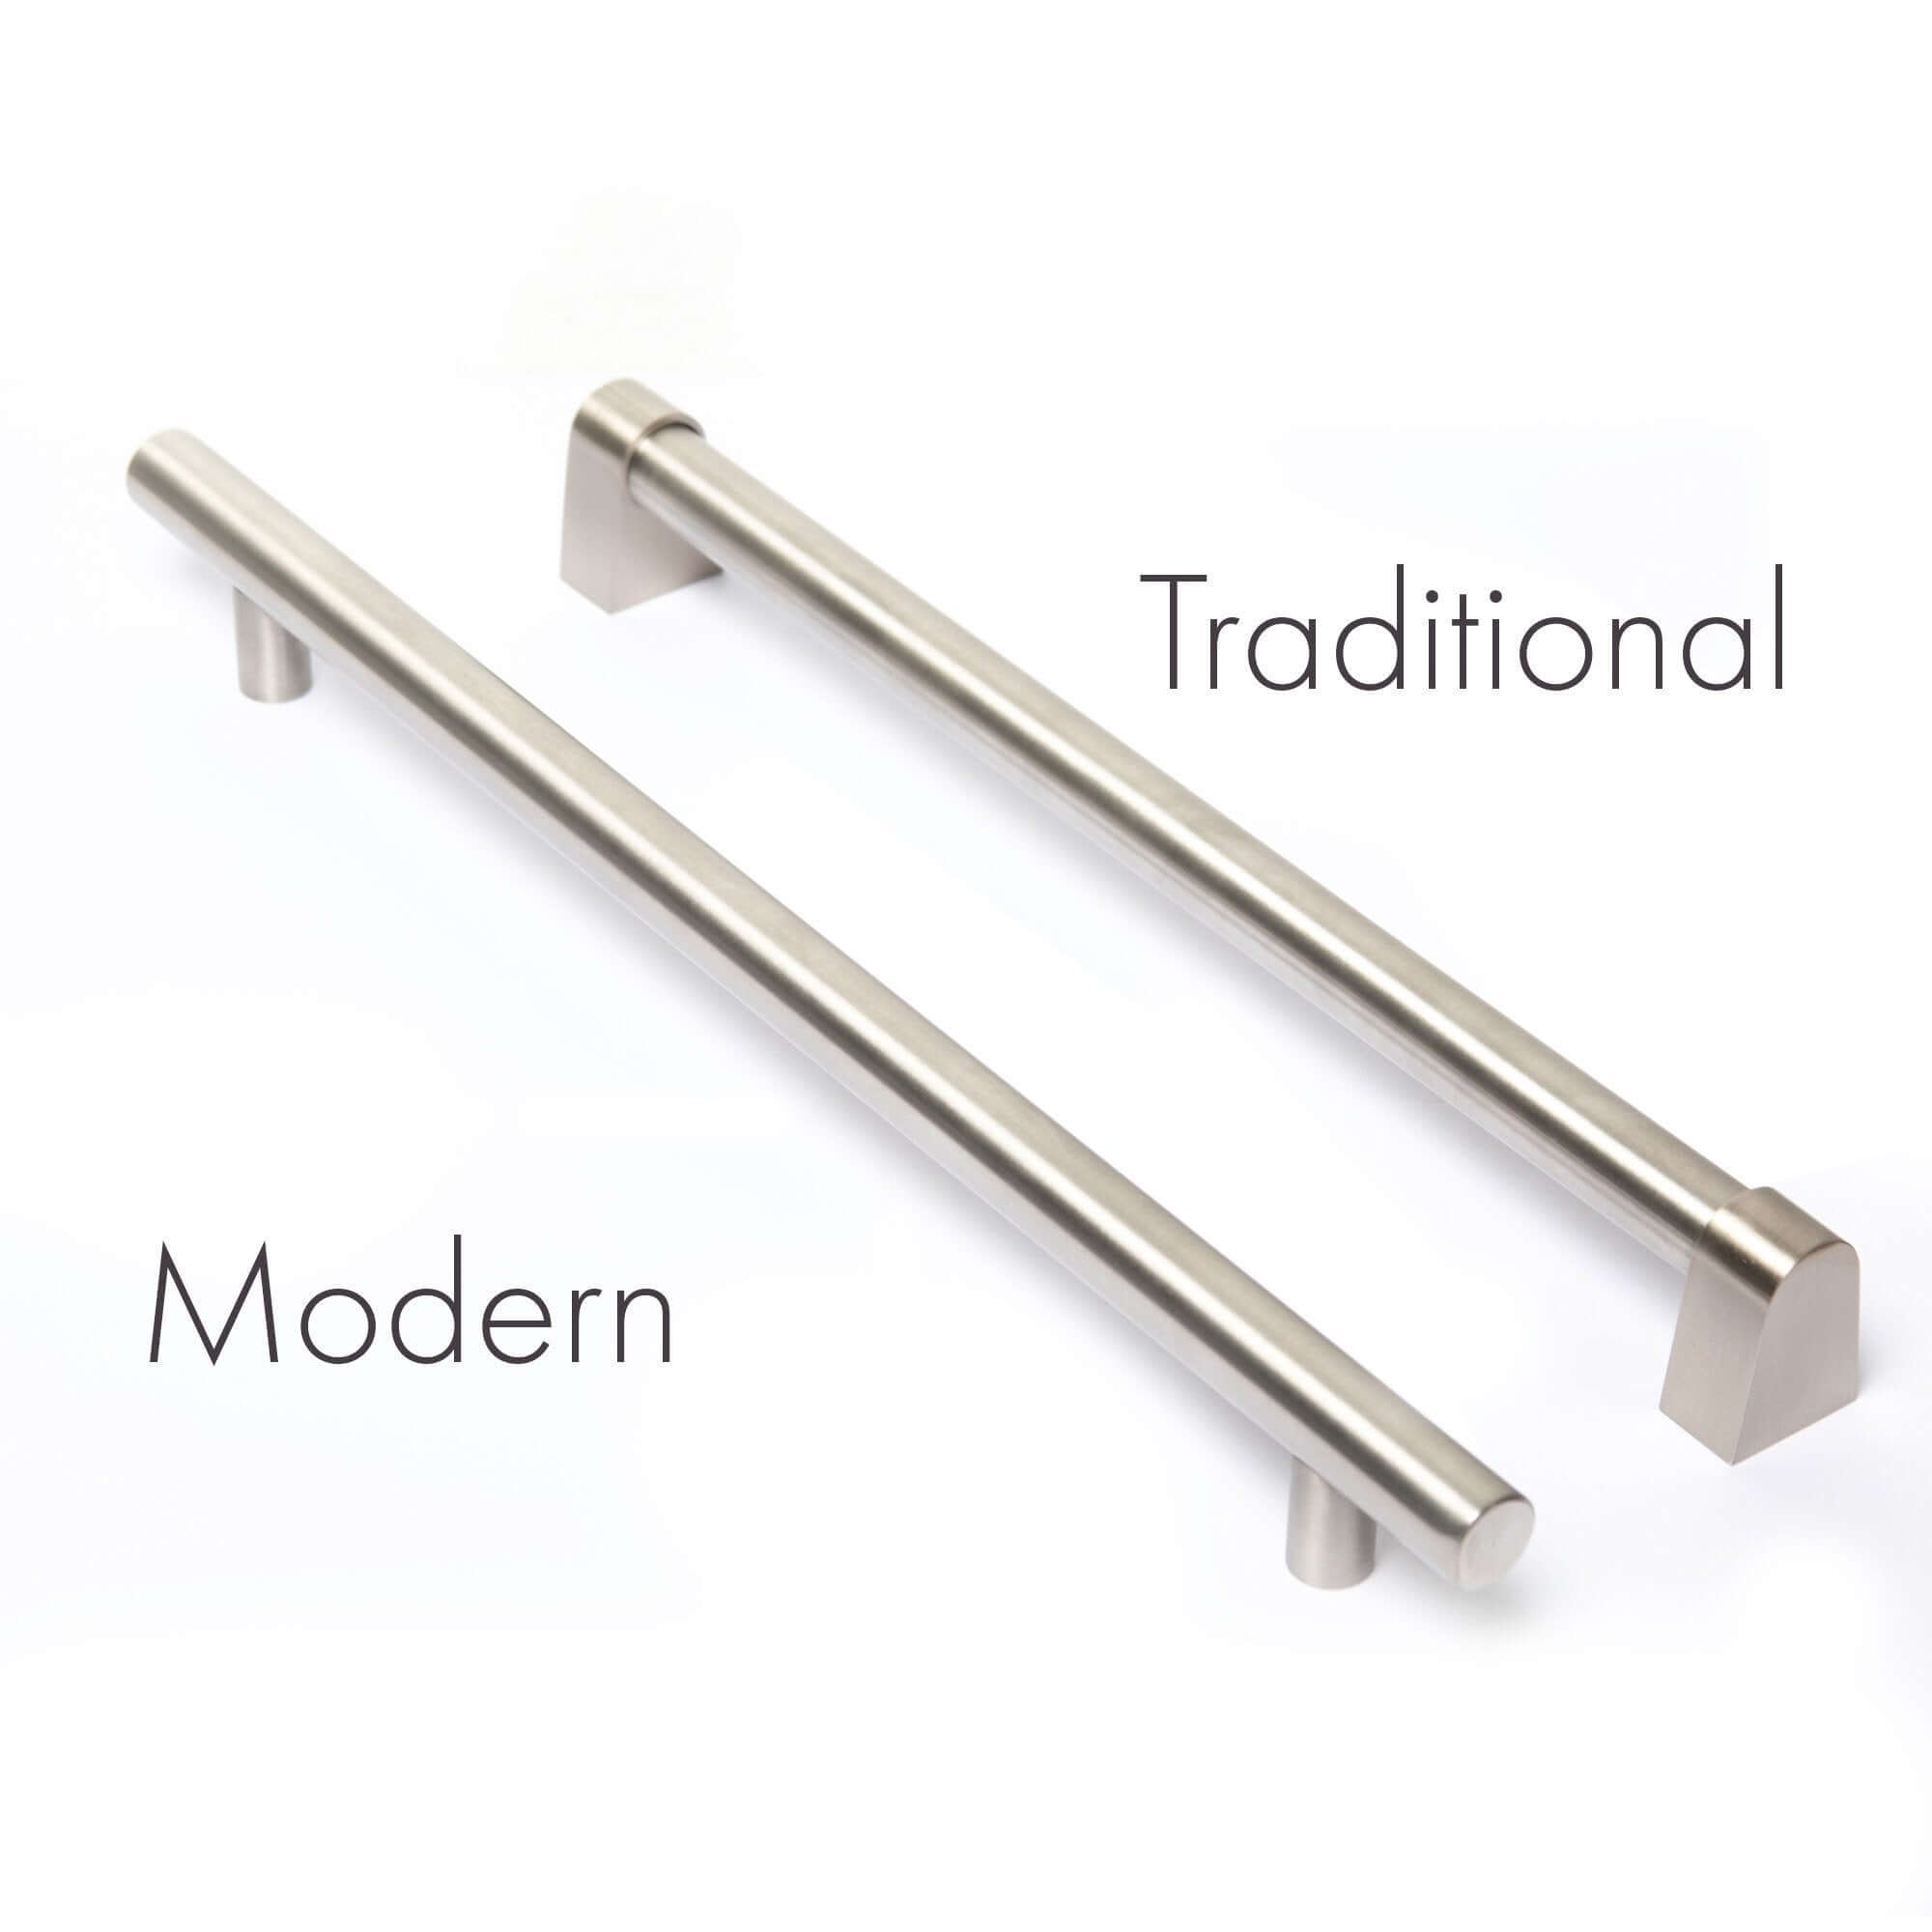 Traditional and modern dishwasher handles compared